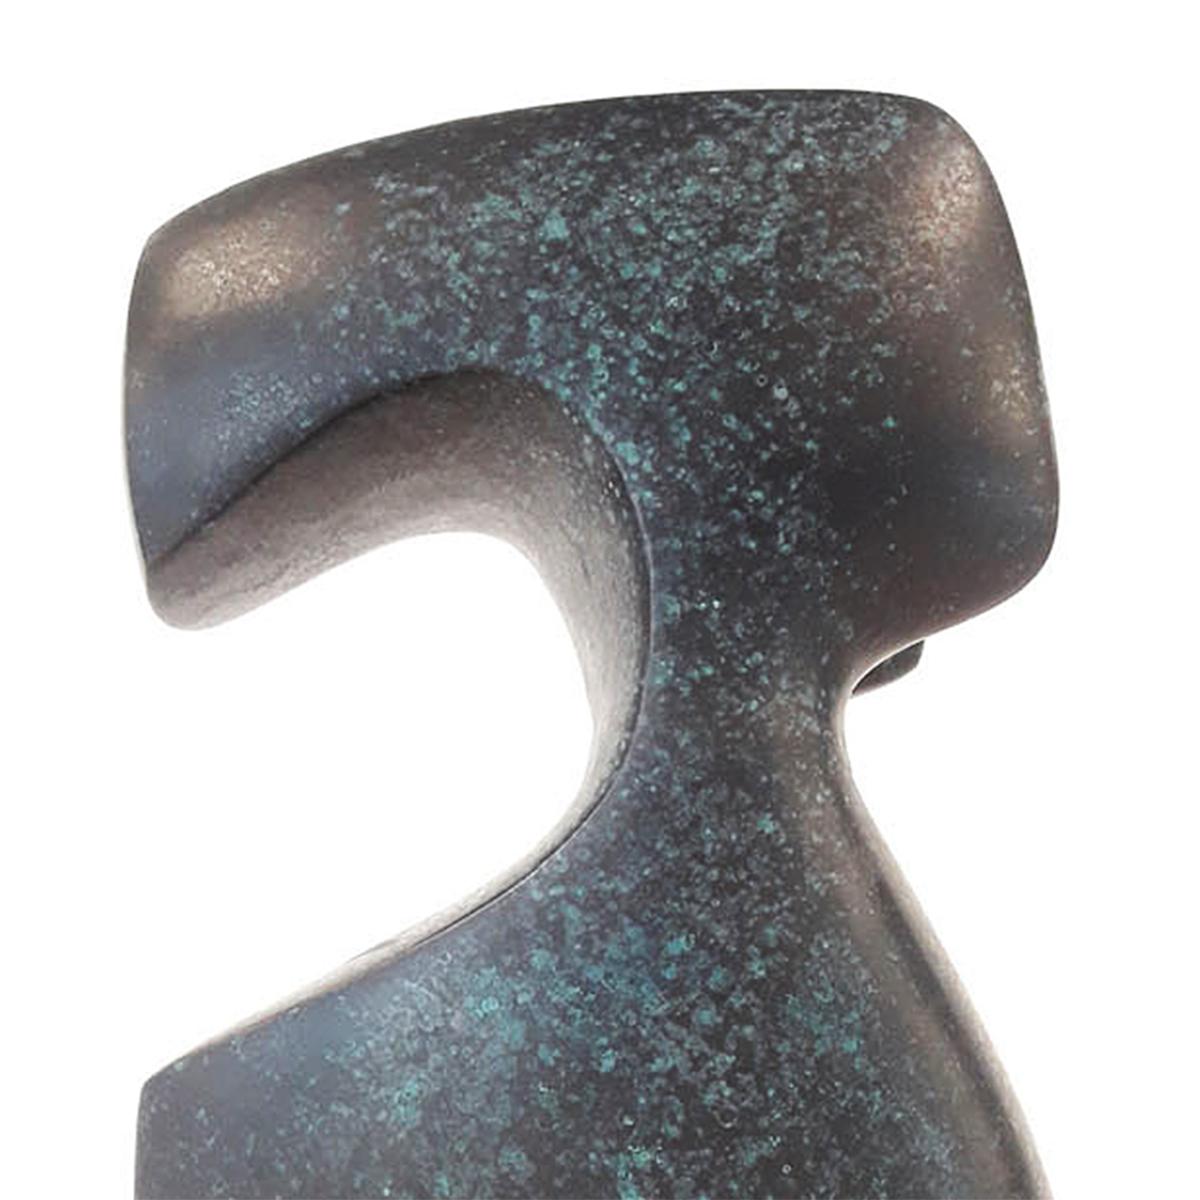 Sculpture Elliot Bronze all in solid
bronze in green finish.
Also available in polished bronze finish, price 5850,00€.